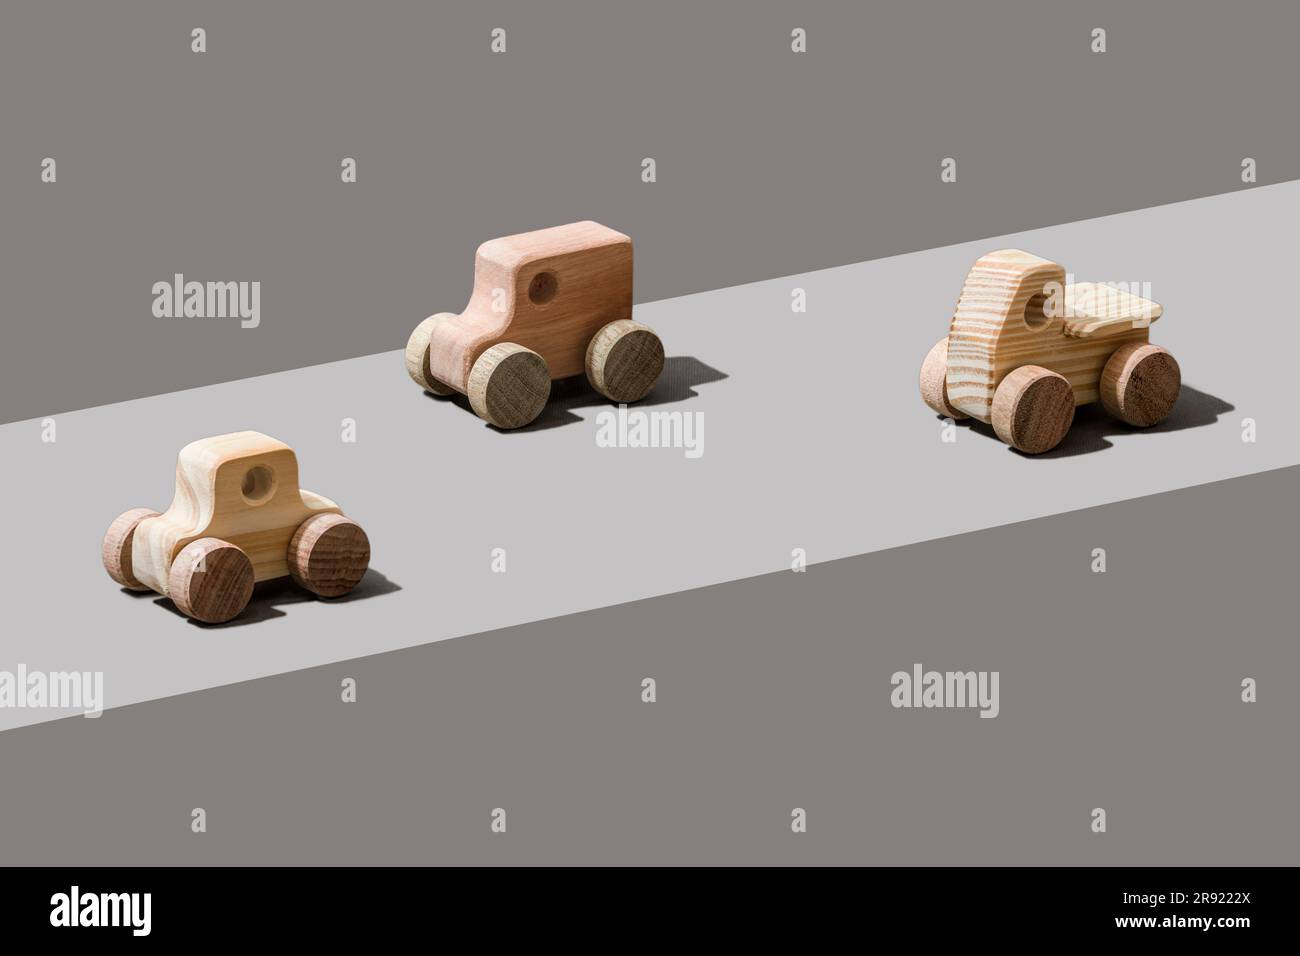 Wooden cars on gray background Stock Photo